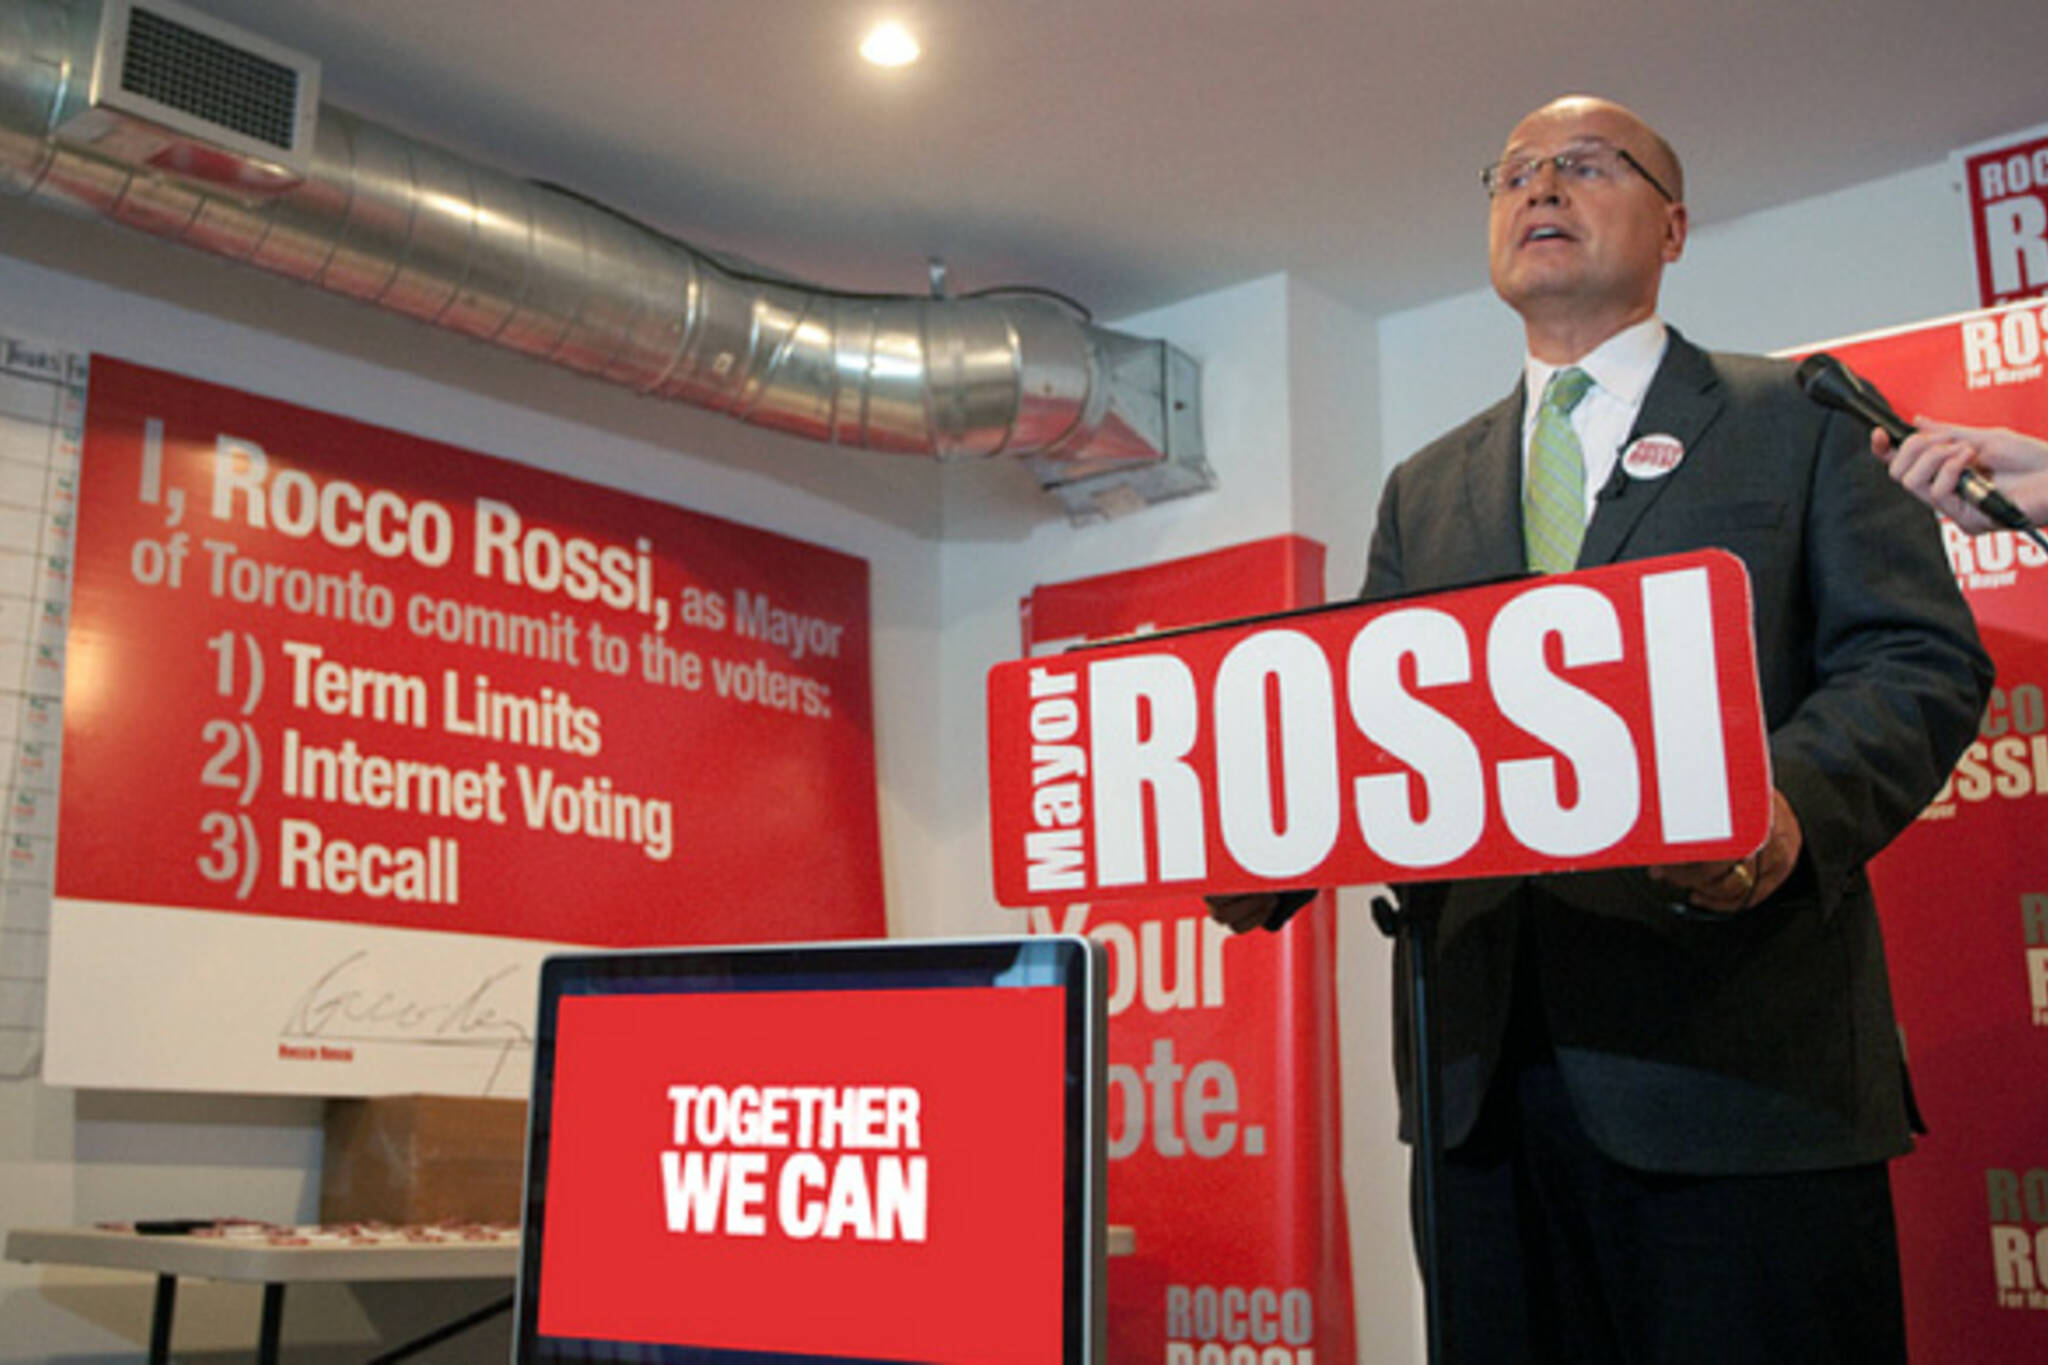 Rocco Rossi drops out mayoral race